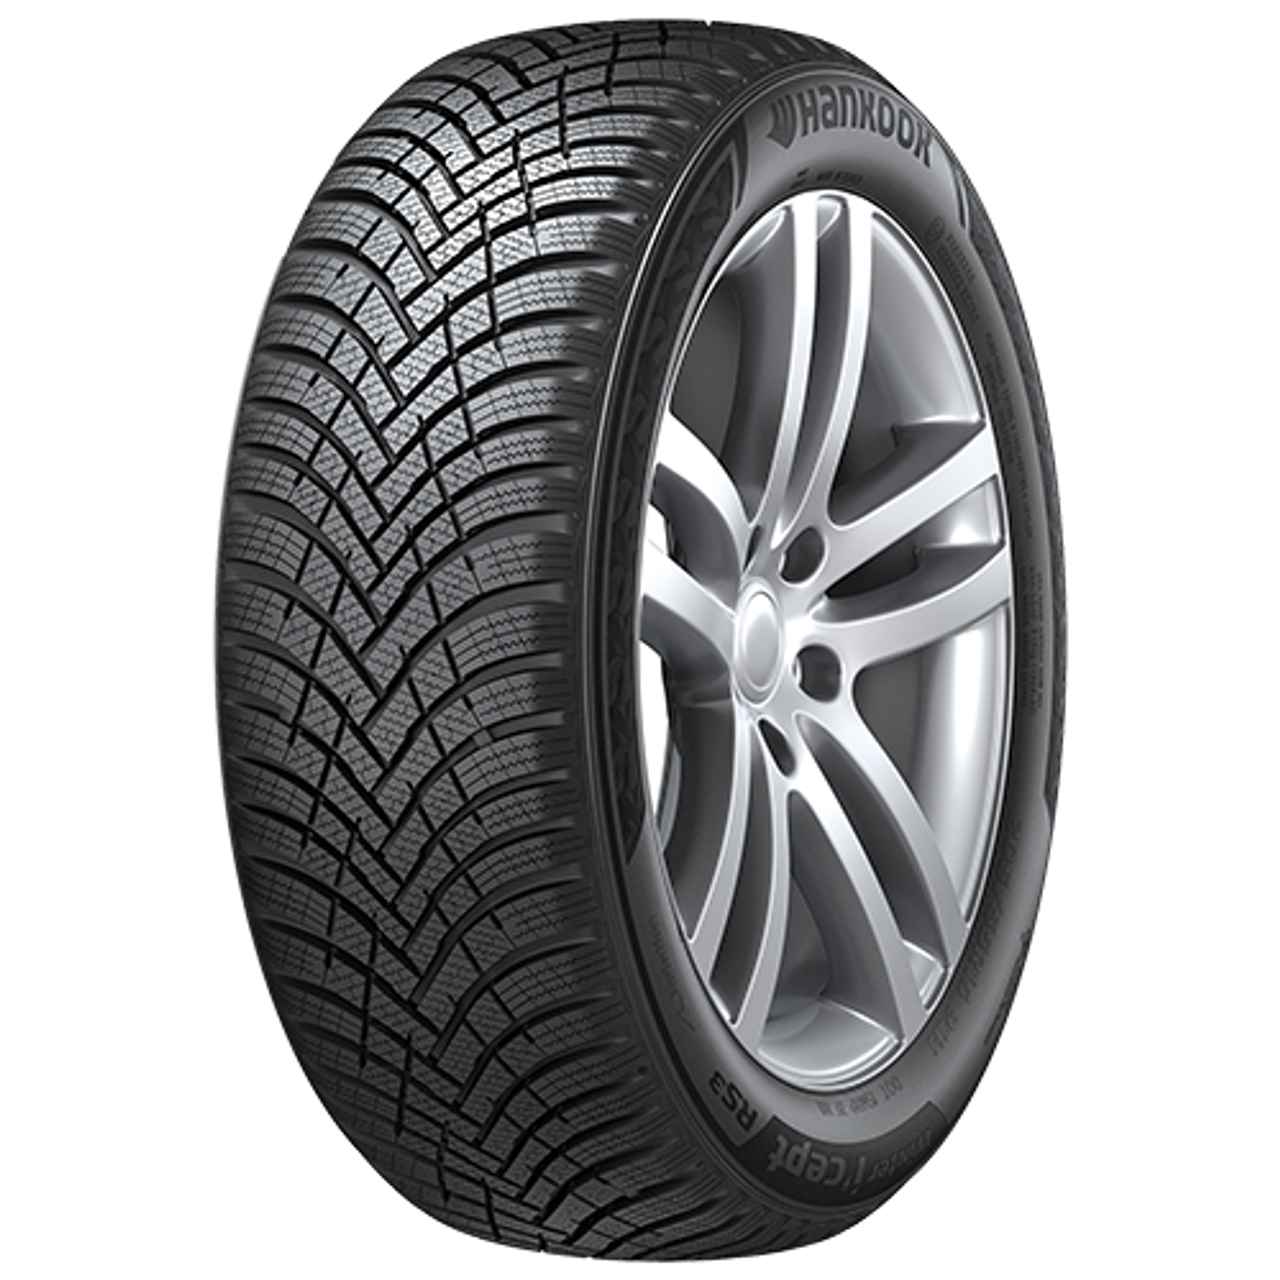 HANKOOK WINTER I*CEPT RS3 185/60R15 84T BSW